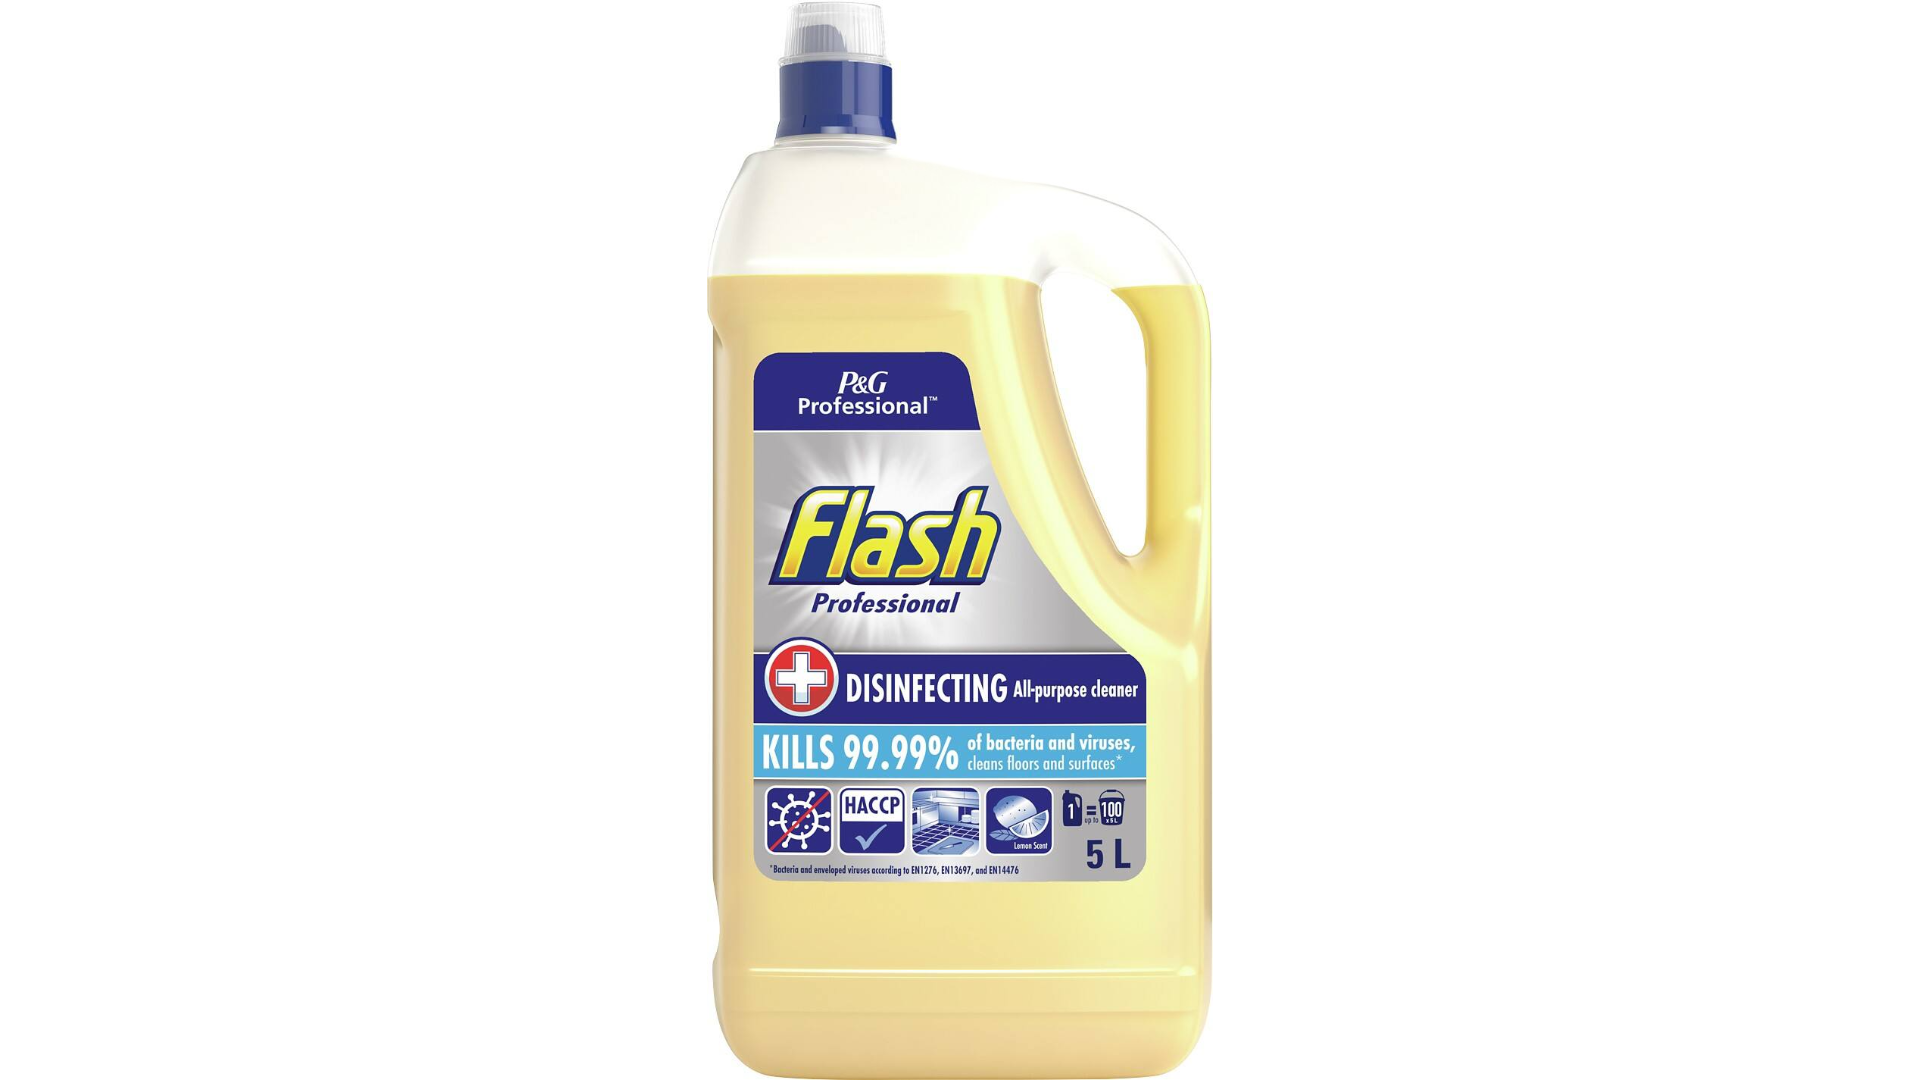 P&G Flash Professional Disinfecting All Purpose Cleaner 5Ltr | Medical Supermarket